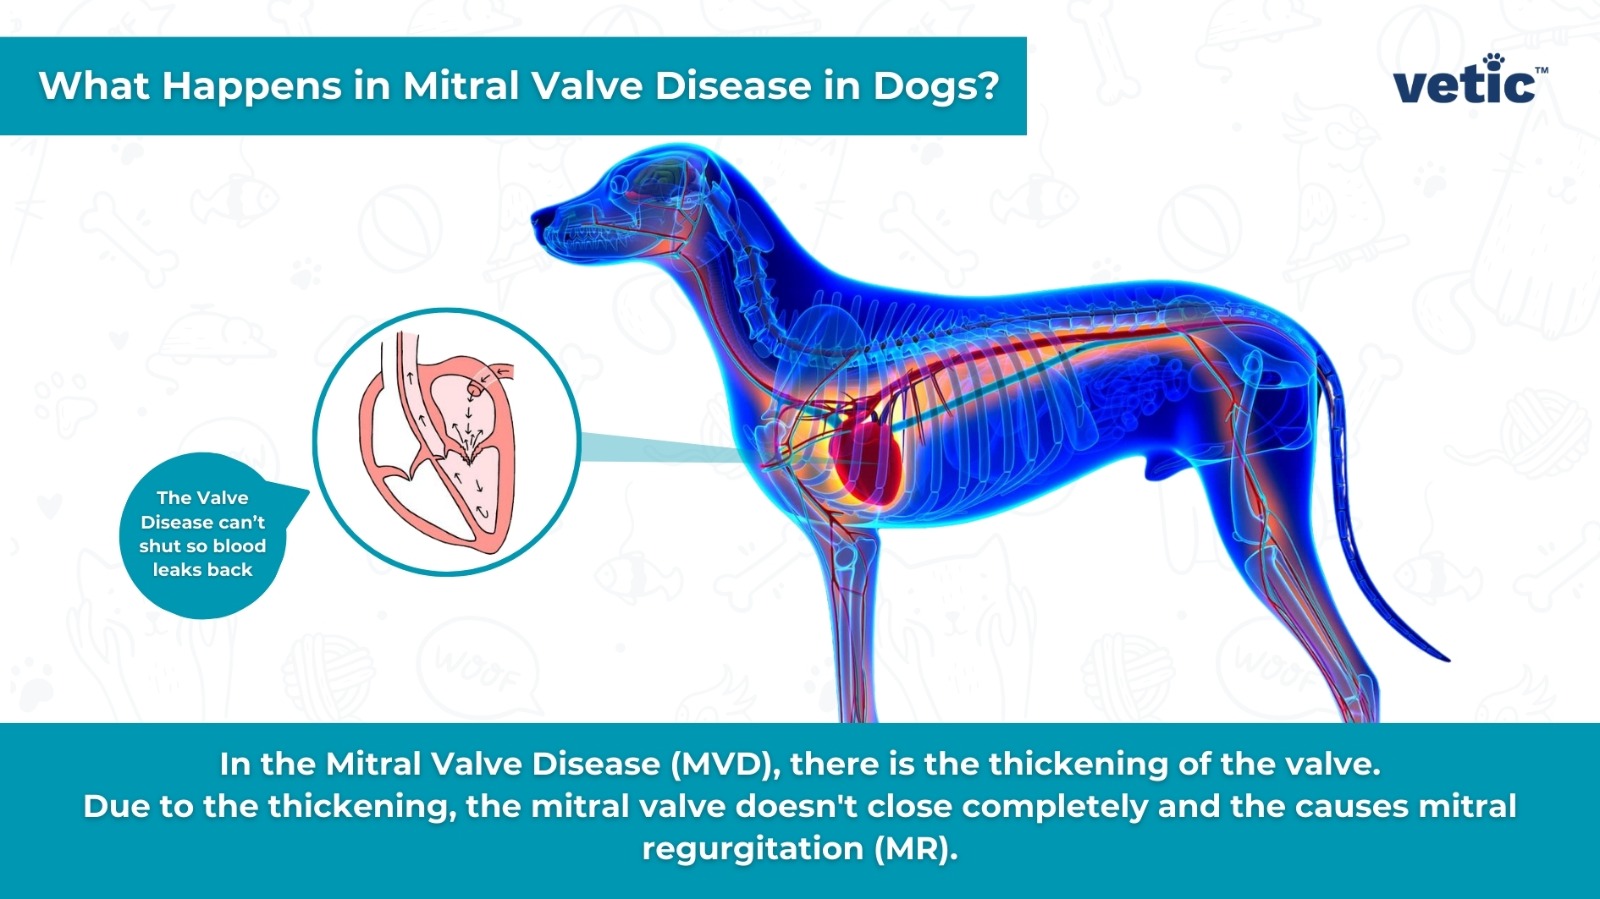 The image is an infographic on "What is Mitral Valve Disease in Dogs?" illustration that explains Mitral Valve Disease (MVD) in dogs. It features a blue outlined silhouette of a dog with its internal organs visible, focusing on the heart. A detailed inset shows the mitral valve affected by MVD, highlighting the thickening of the valve which leads to mitral regurgitation. This condition prevents the valve from closing completely, allowing blood to flow backward into the atrium when the heart contracts. The image serves as a comprehensive guide to understanding MVD in dogs.